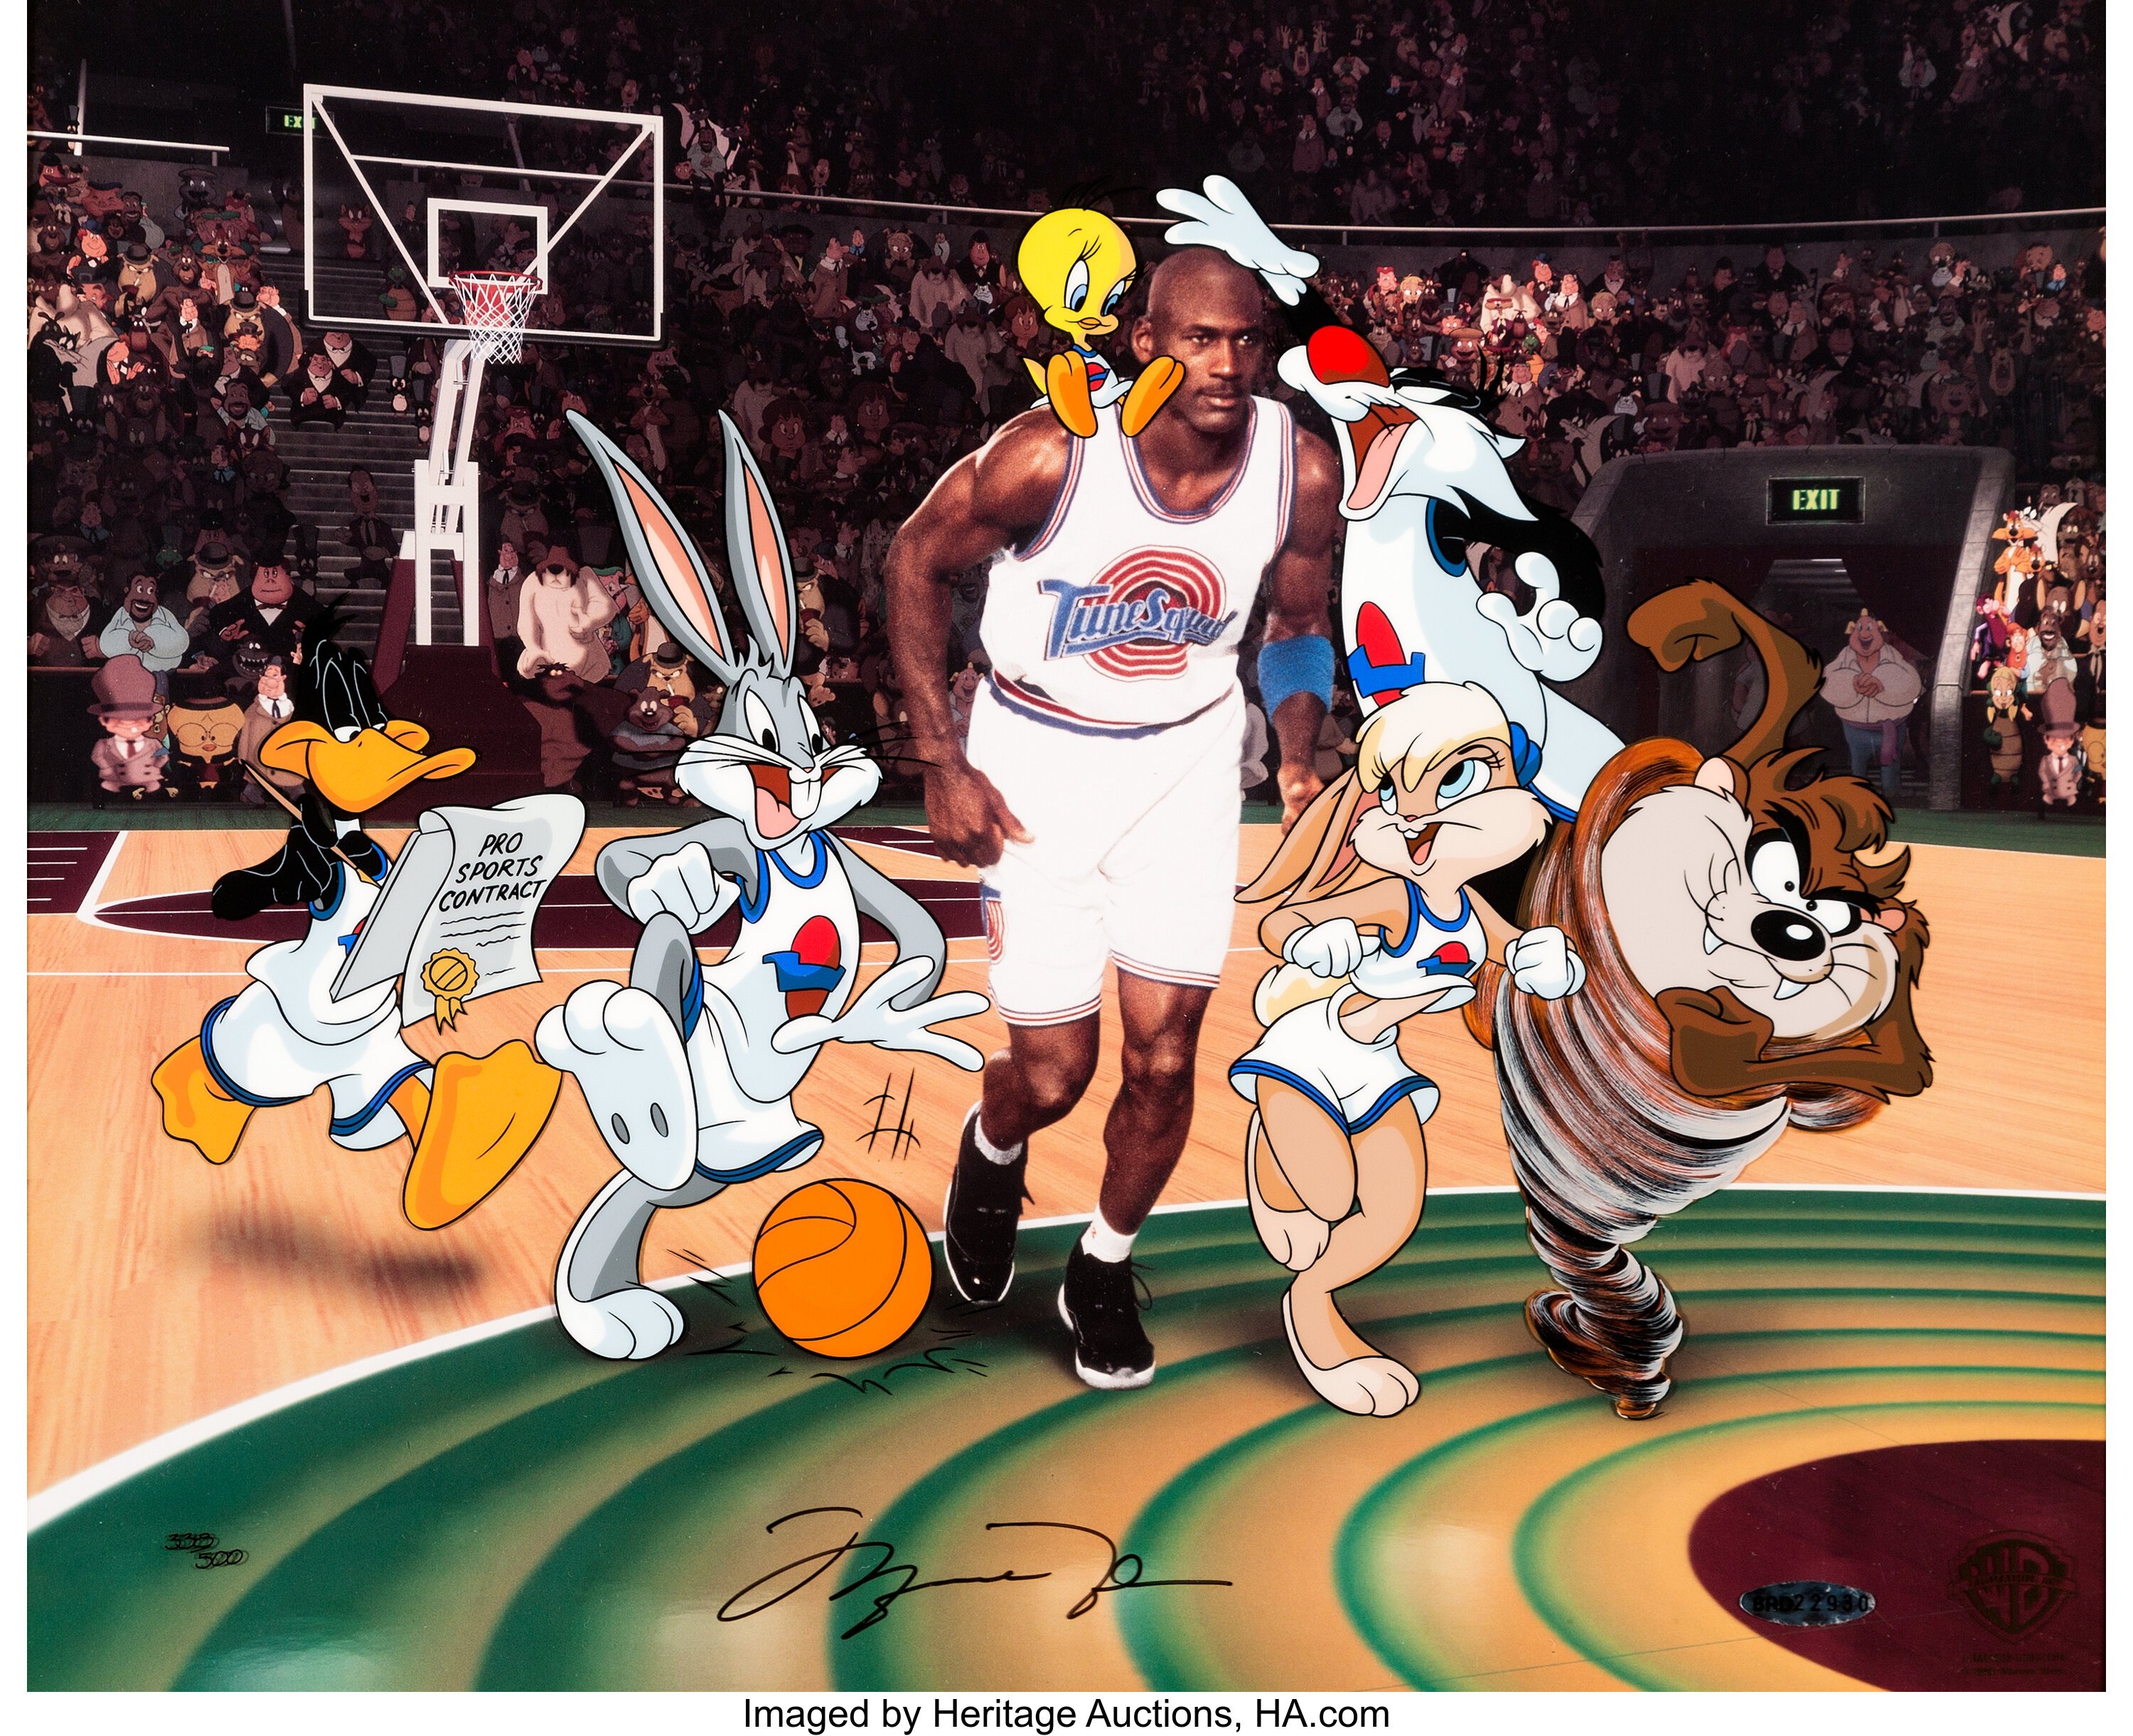 Movie Space Jam HD Wallpaper Background Image.